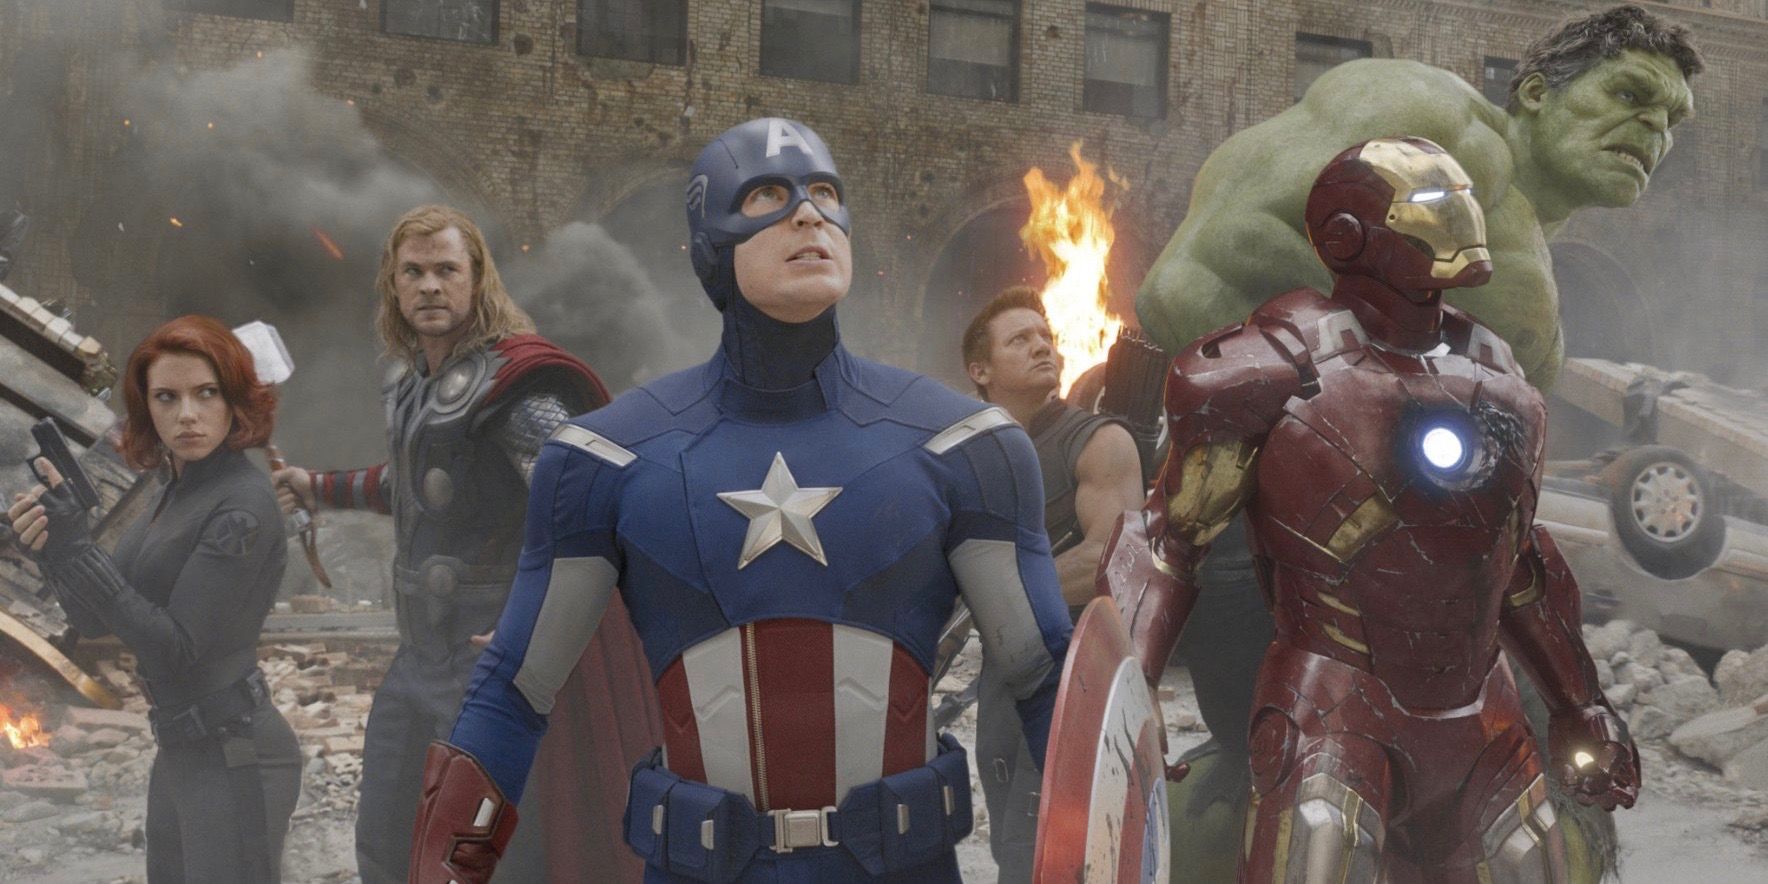 The Avengers together and looking up among the wreck in 2012's The Avengers.